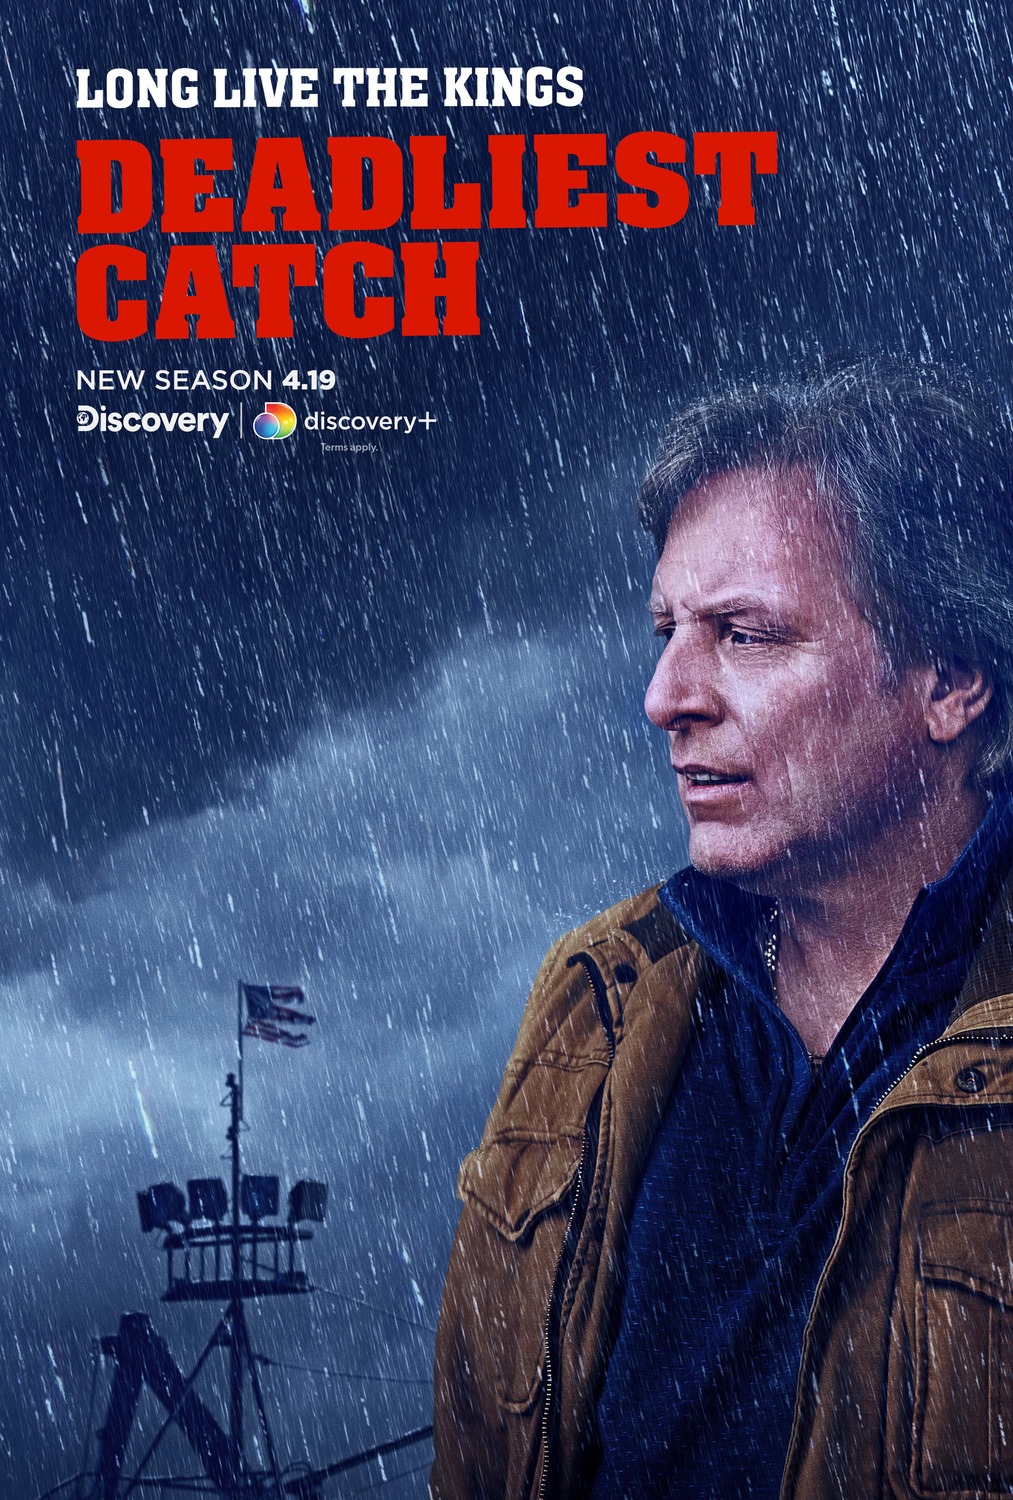 Extra Large TV Poster Image for Deadliest Catch (#6 of 6)